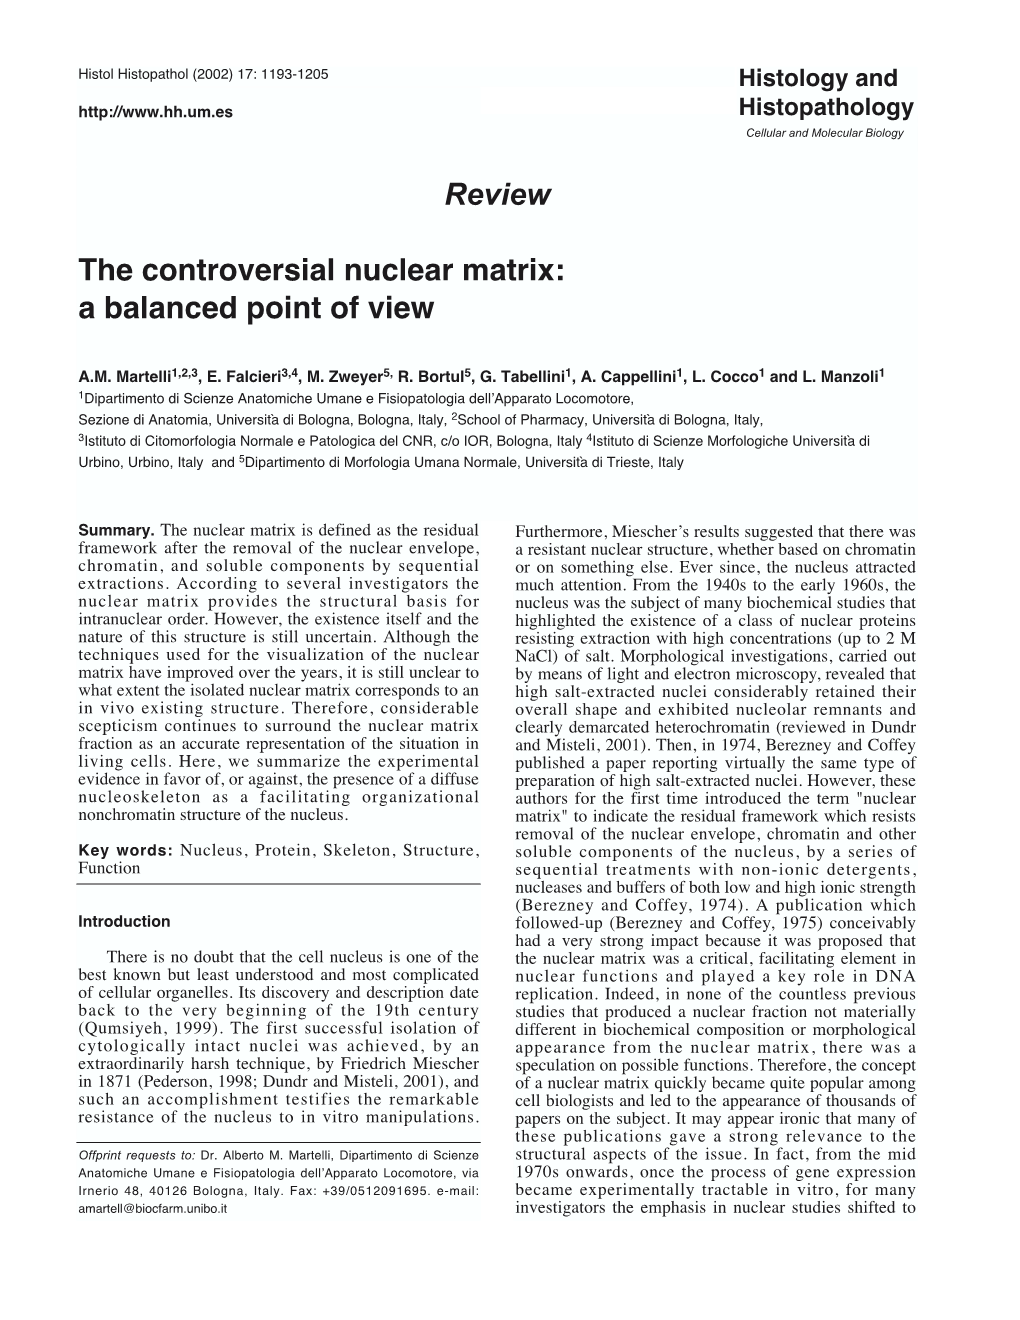 Review the Controversial Nuclear Matrix